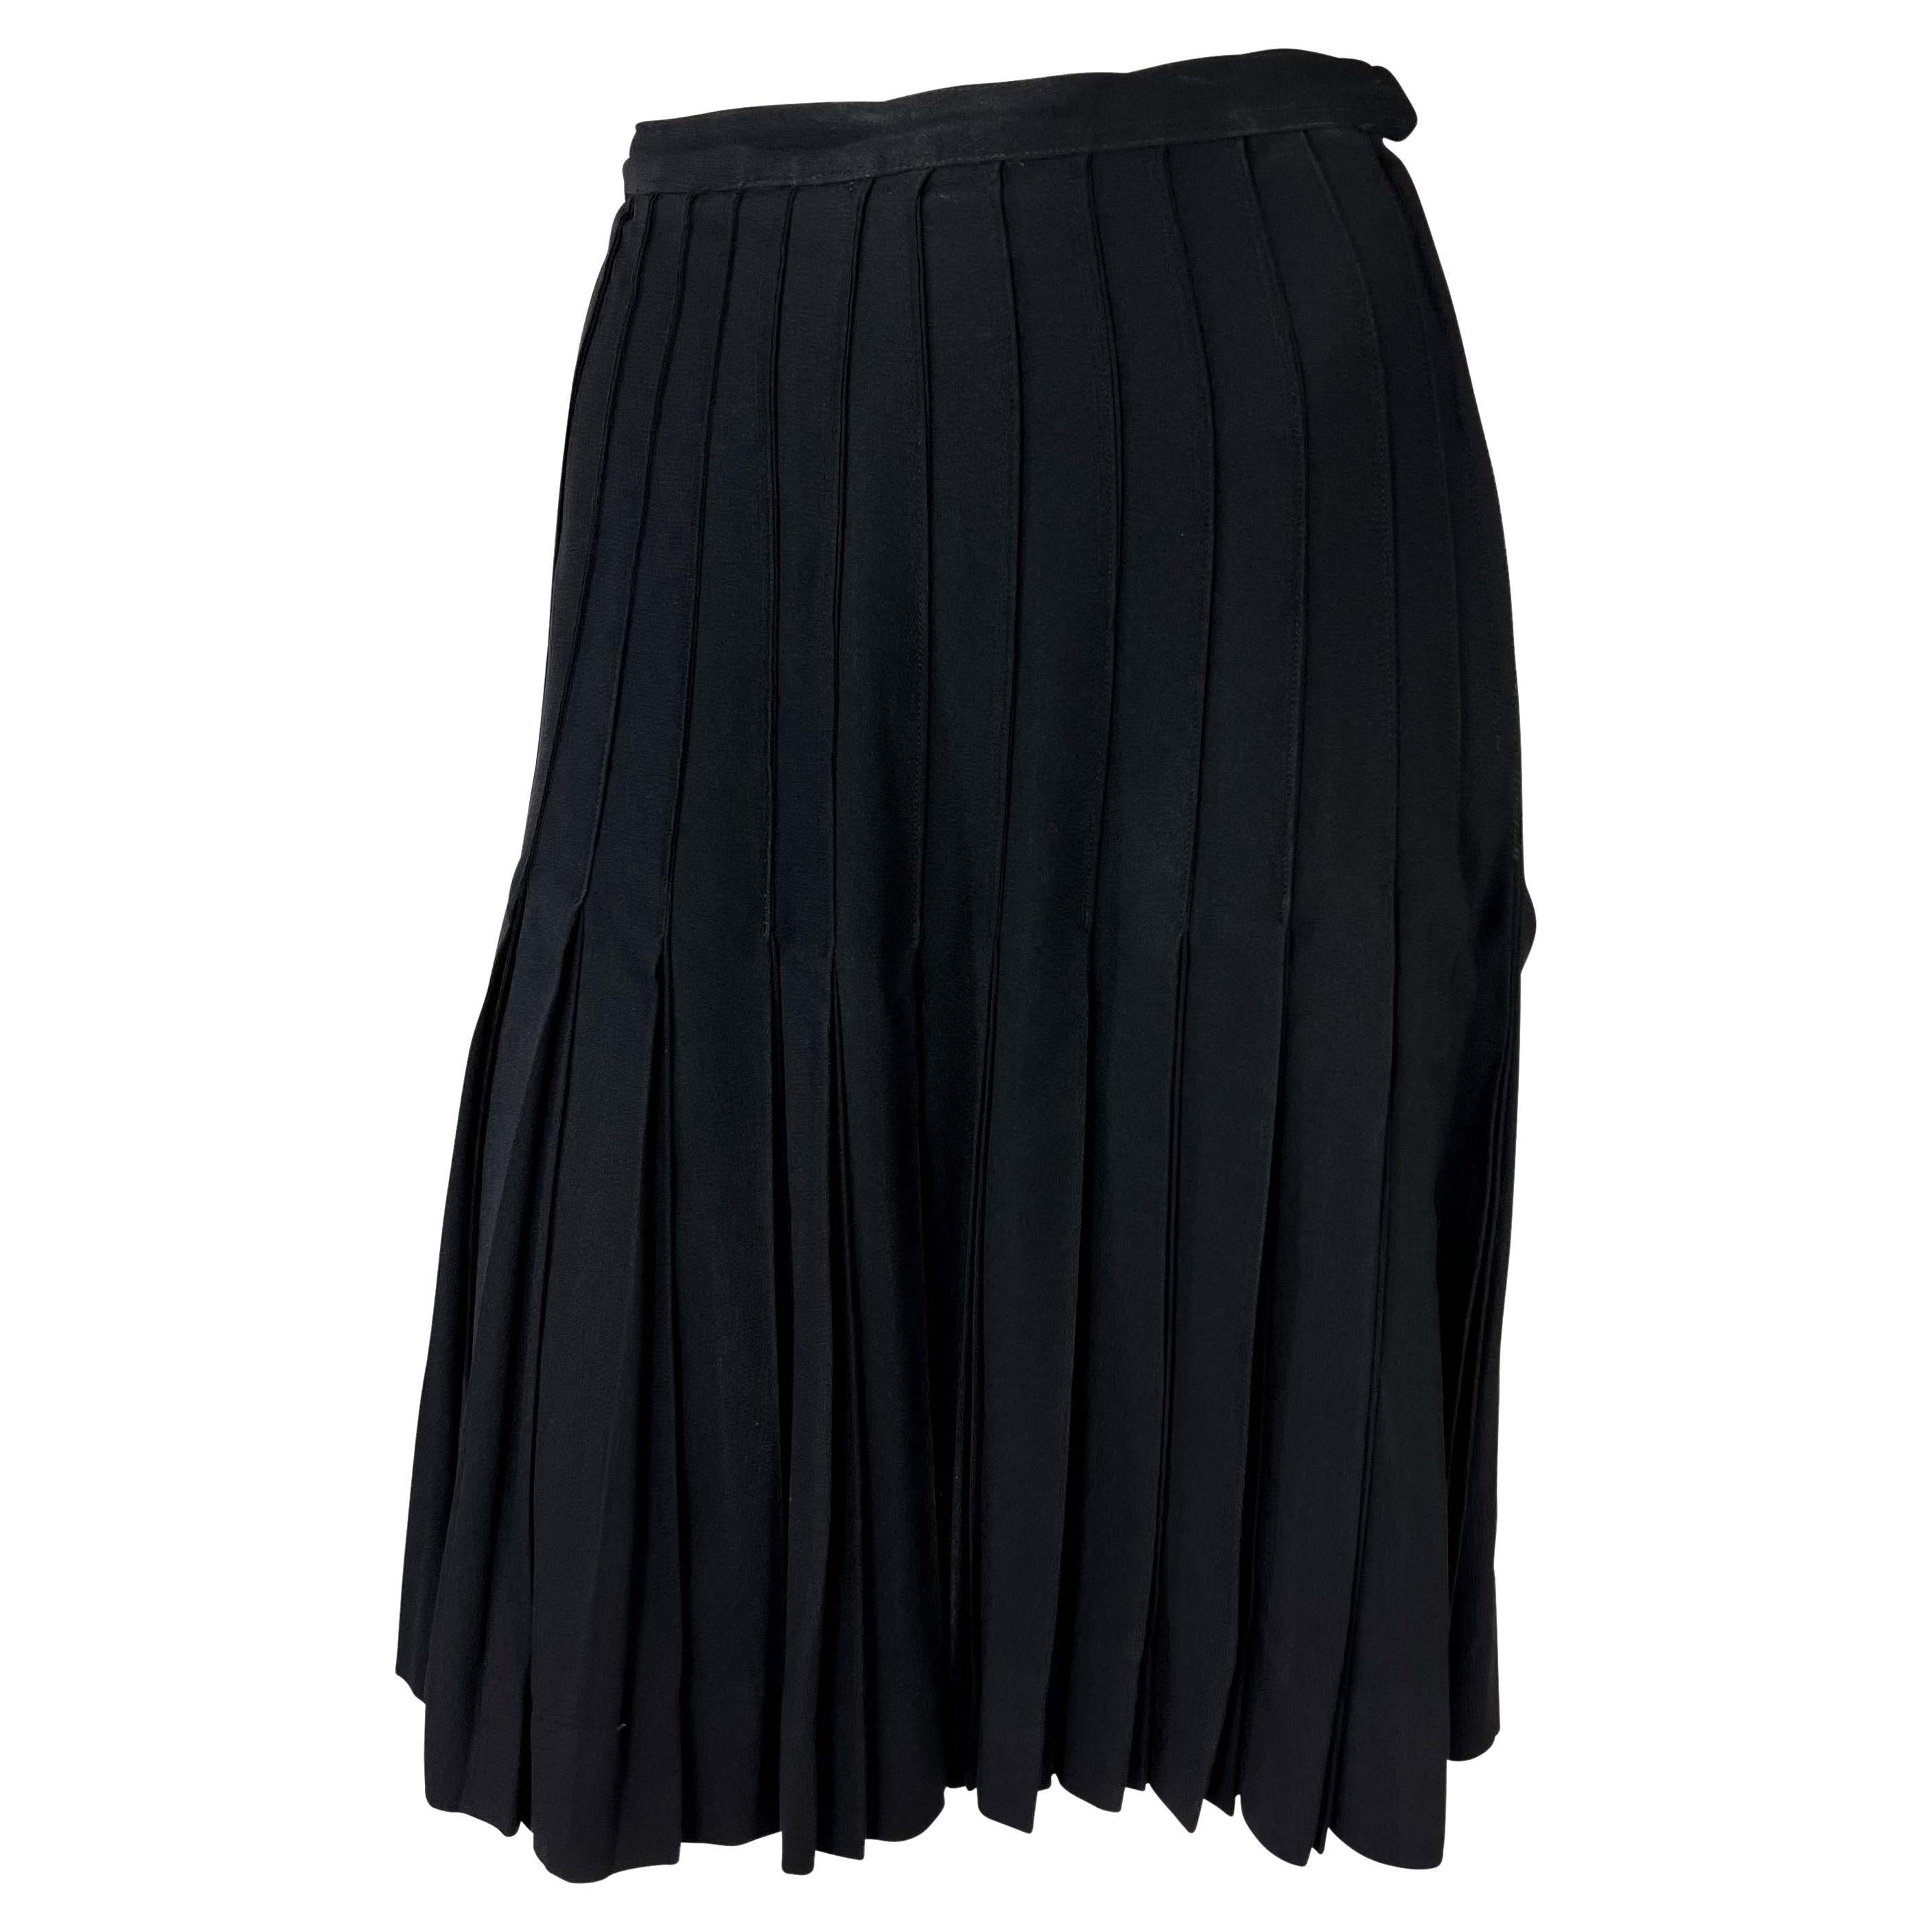 Presenting a black accordion pleated skirt designed by Yves Saint Laurent for his ready-to-wear line, Saint Laurent Rive Gauche, in the 1980s. The pleating is expertly sewn to create controlled lines from the waistband to the hip that flare out to